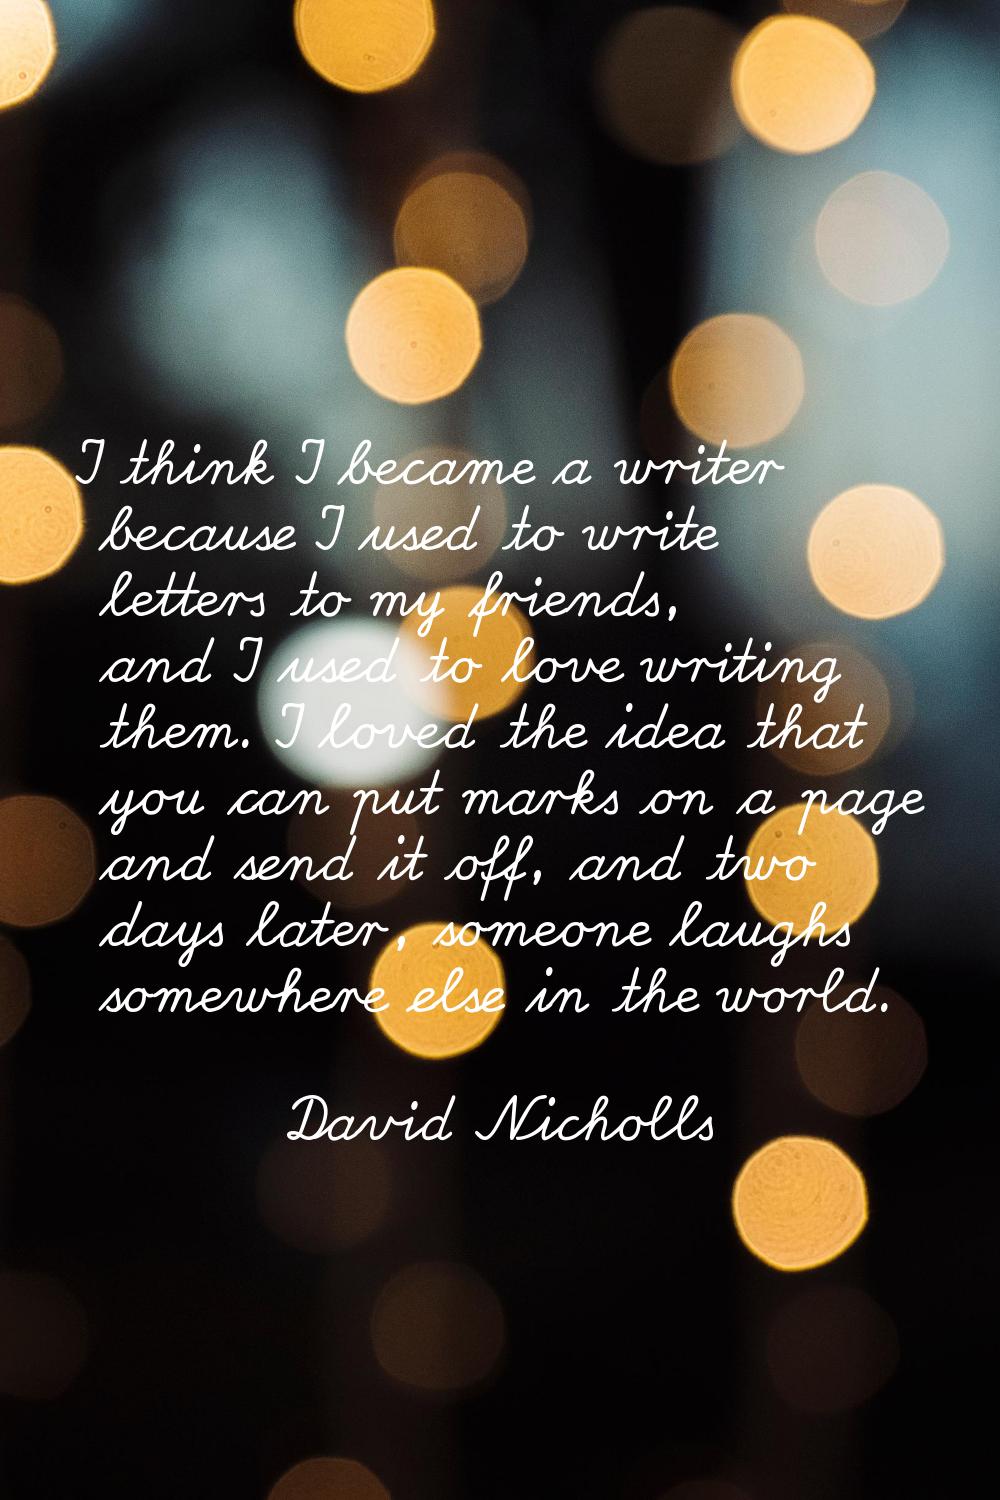 I think I became a writer because I used to write letters to my friends, and I used to love writing